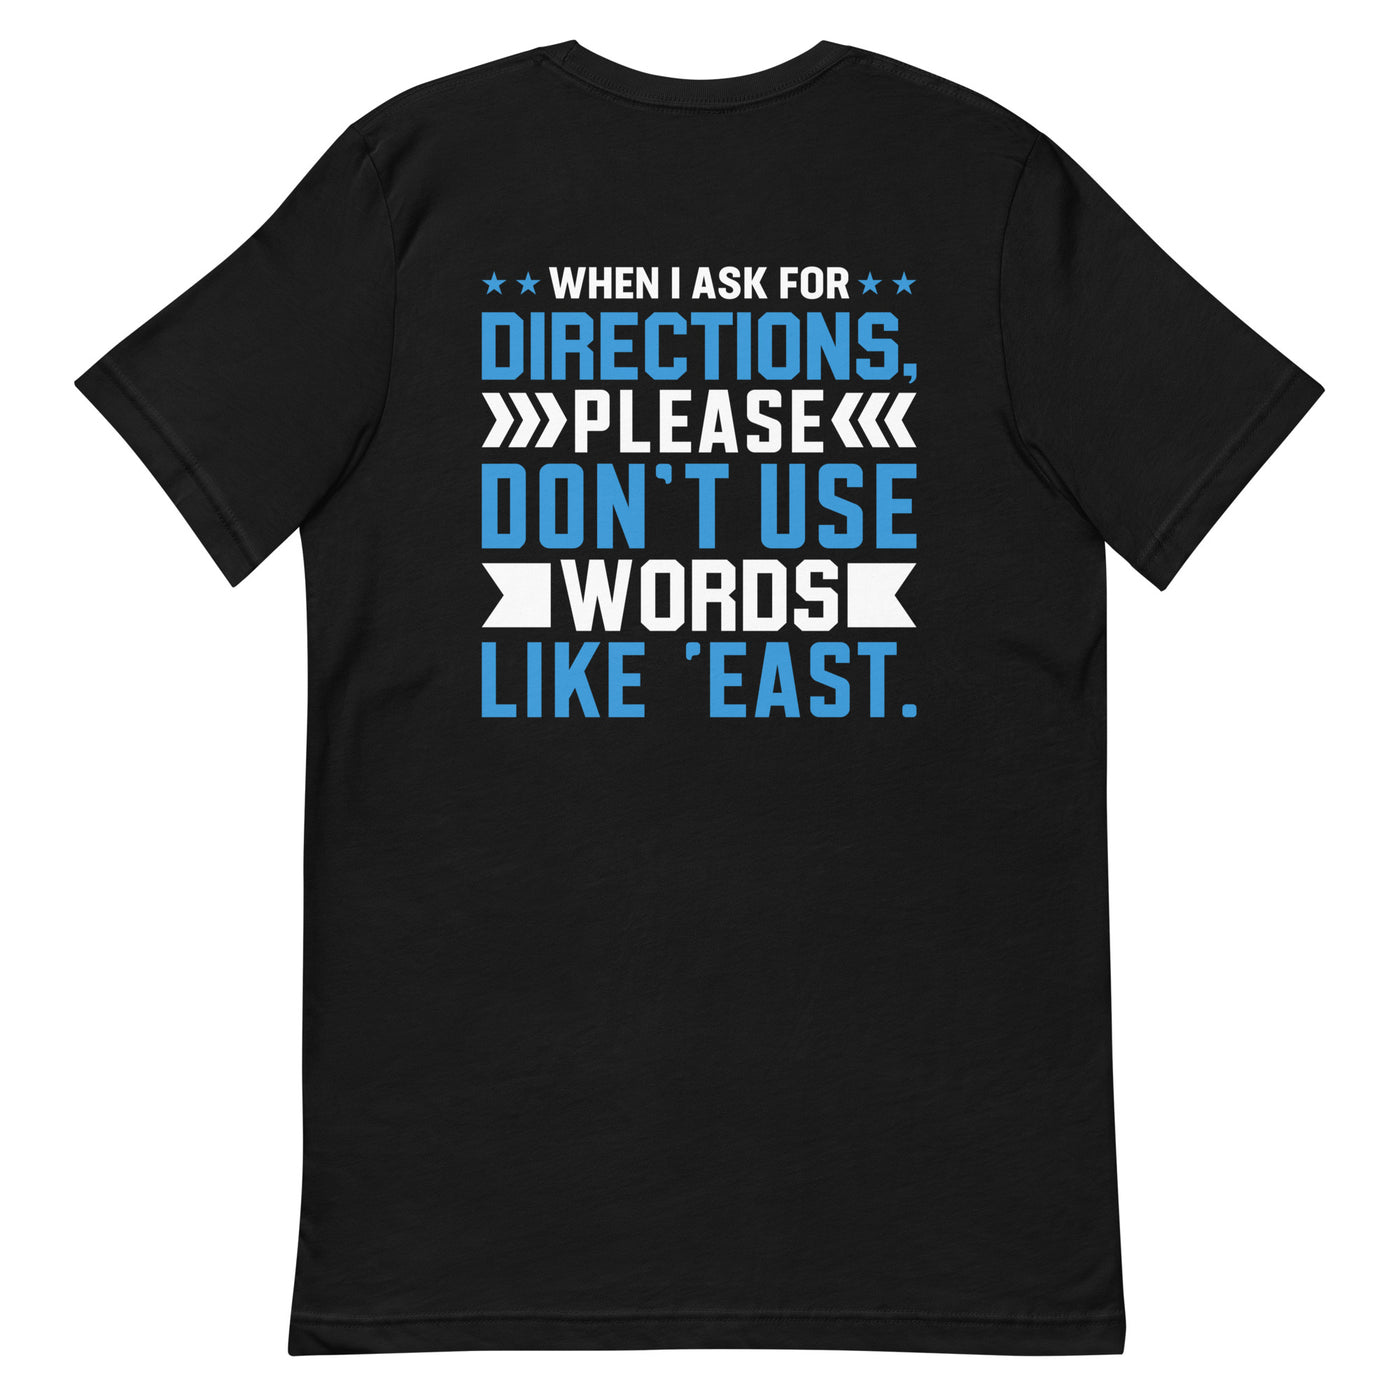 When I ask for directions, please don't use word like 'East' - Unisex t-shirt